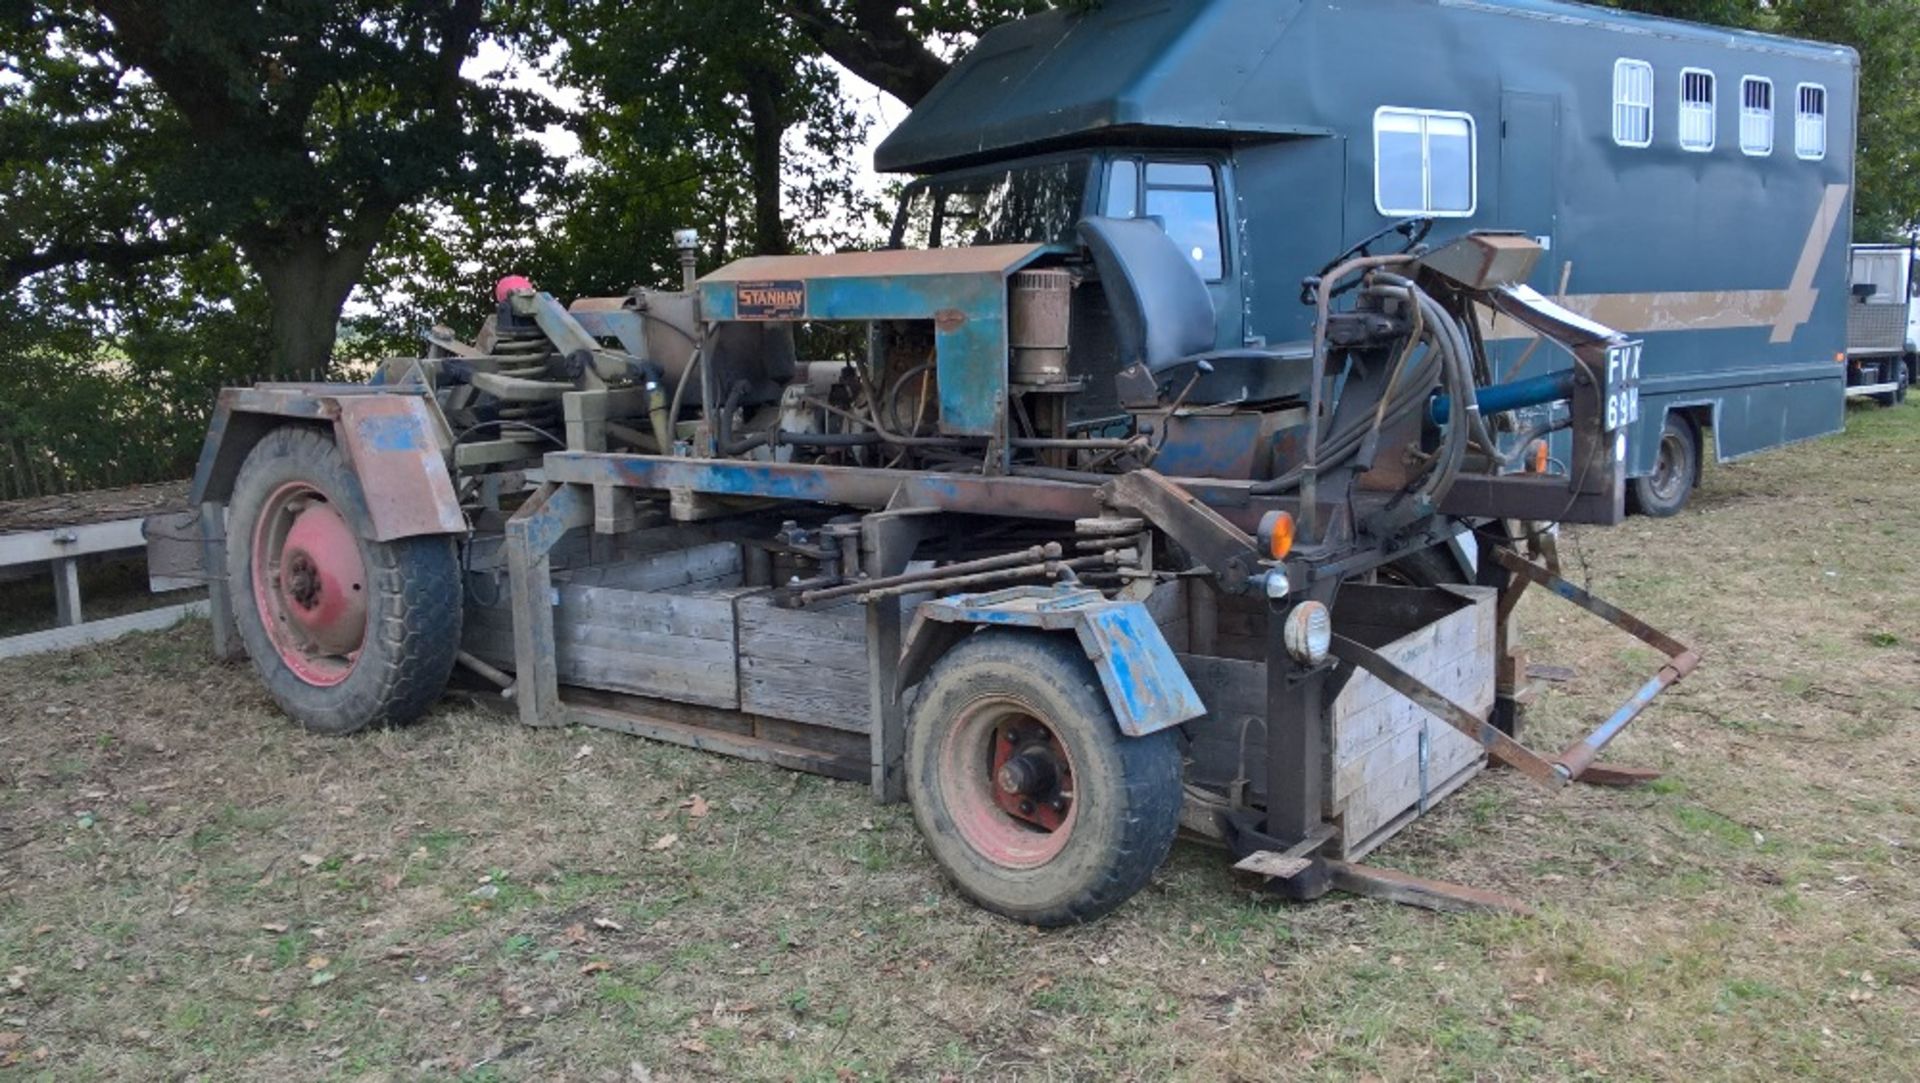 Stanhay Orchard tractor for self-loading apple boxes, powered by a Landrover 2.